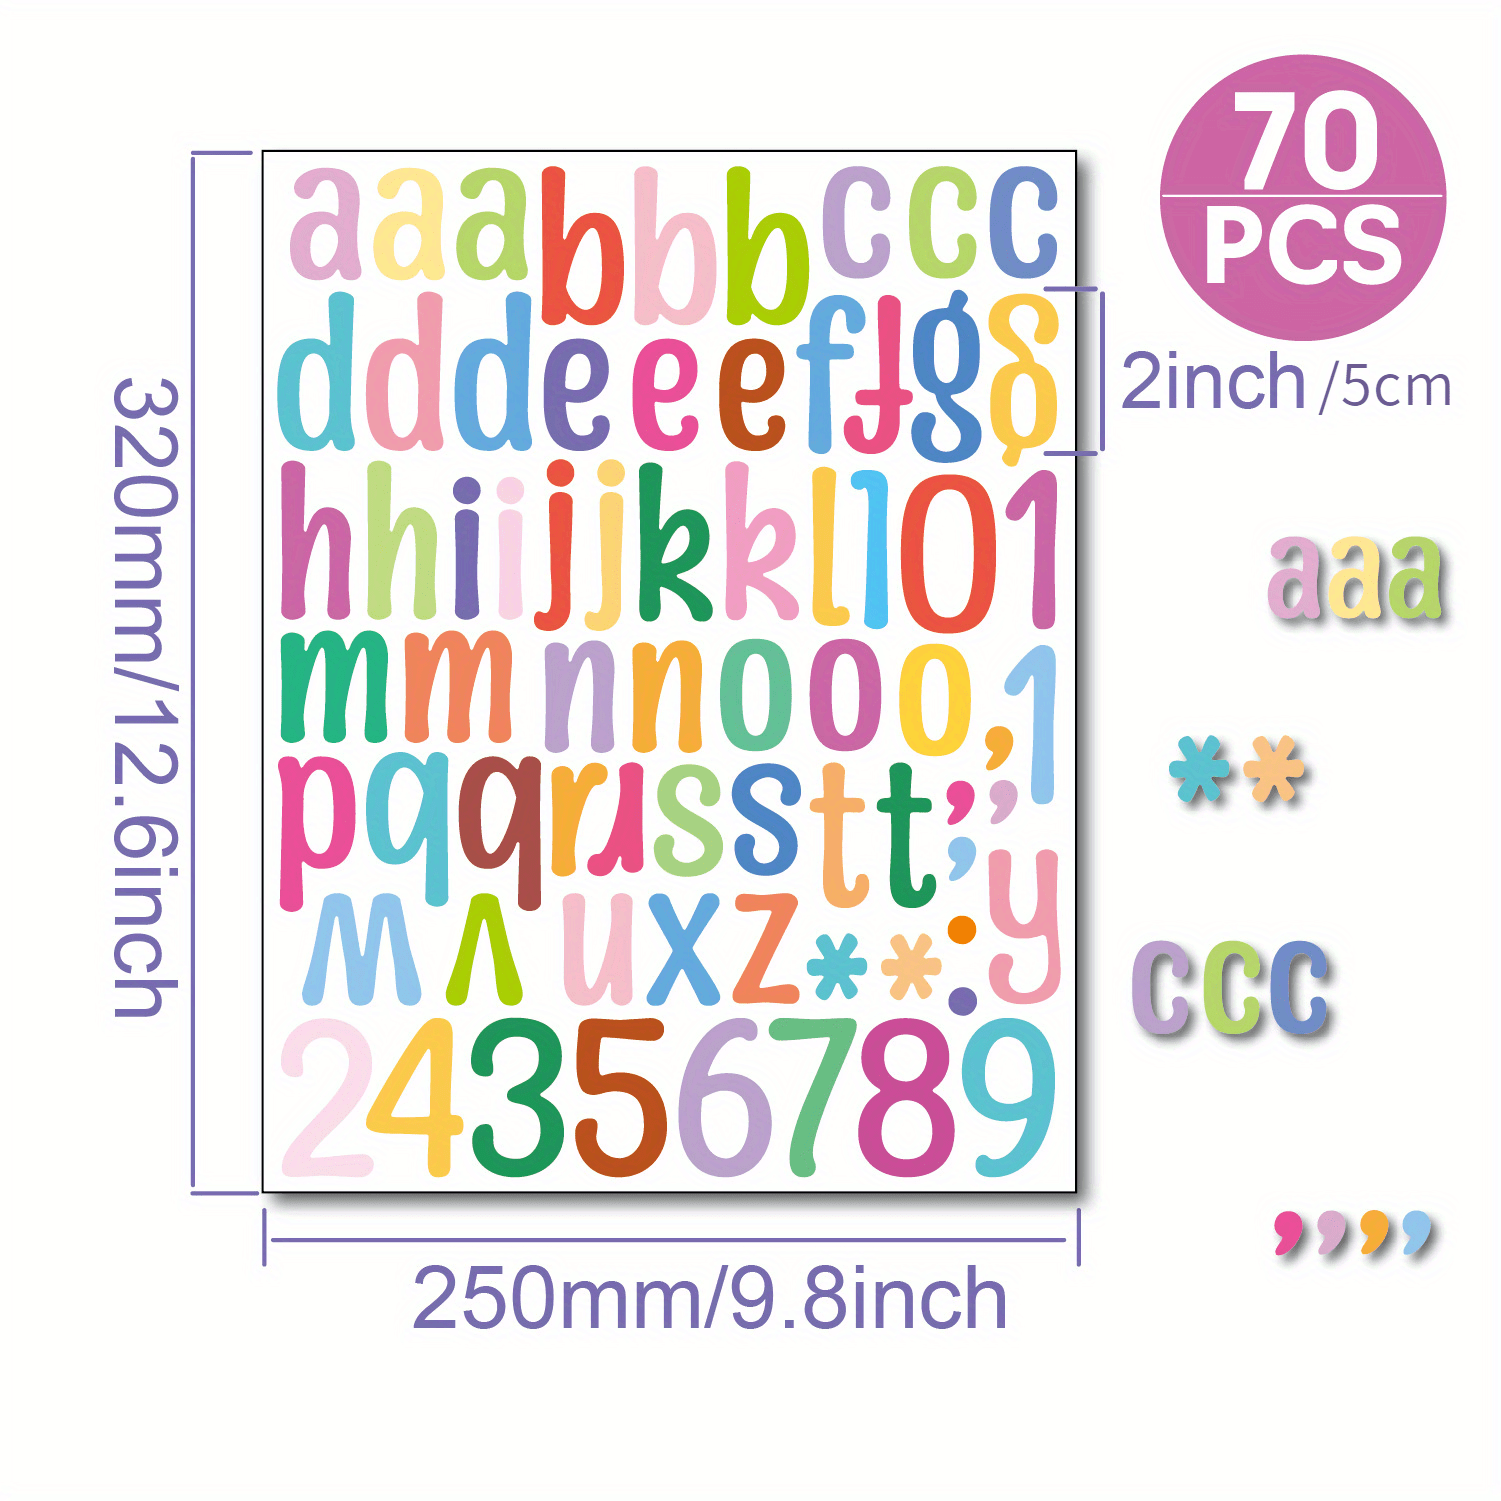  Black Letter Stickers, 2 Inch Large Alphabet Numbers Stickers  Set, 24 Sheets 318 Vinyl Letters Stickers for Bulletin Board, Poster,  Mailbox, Labeling, School Project, Making Signs, Door, Window